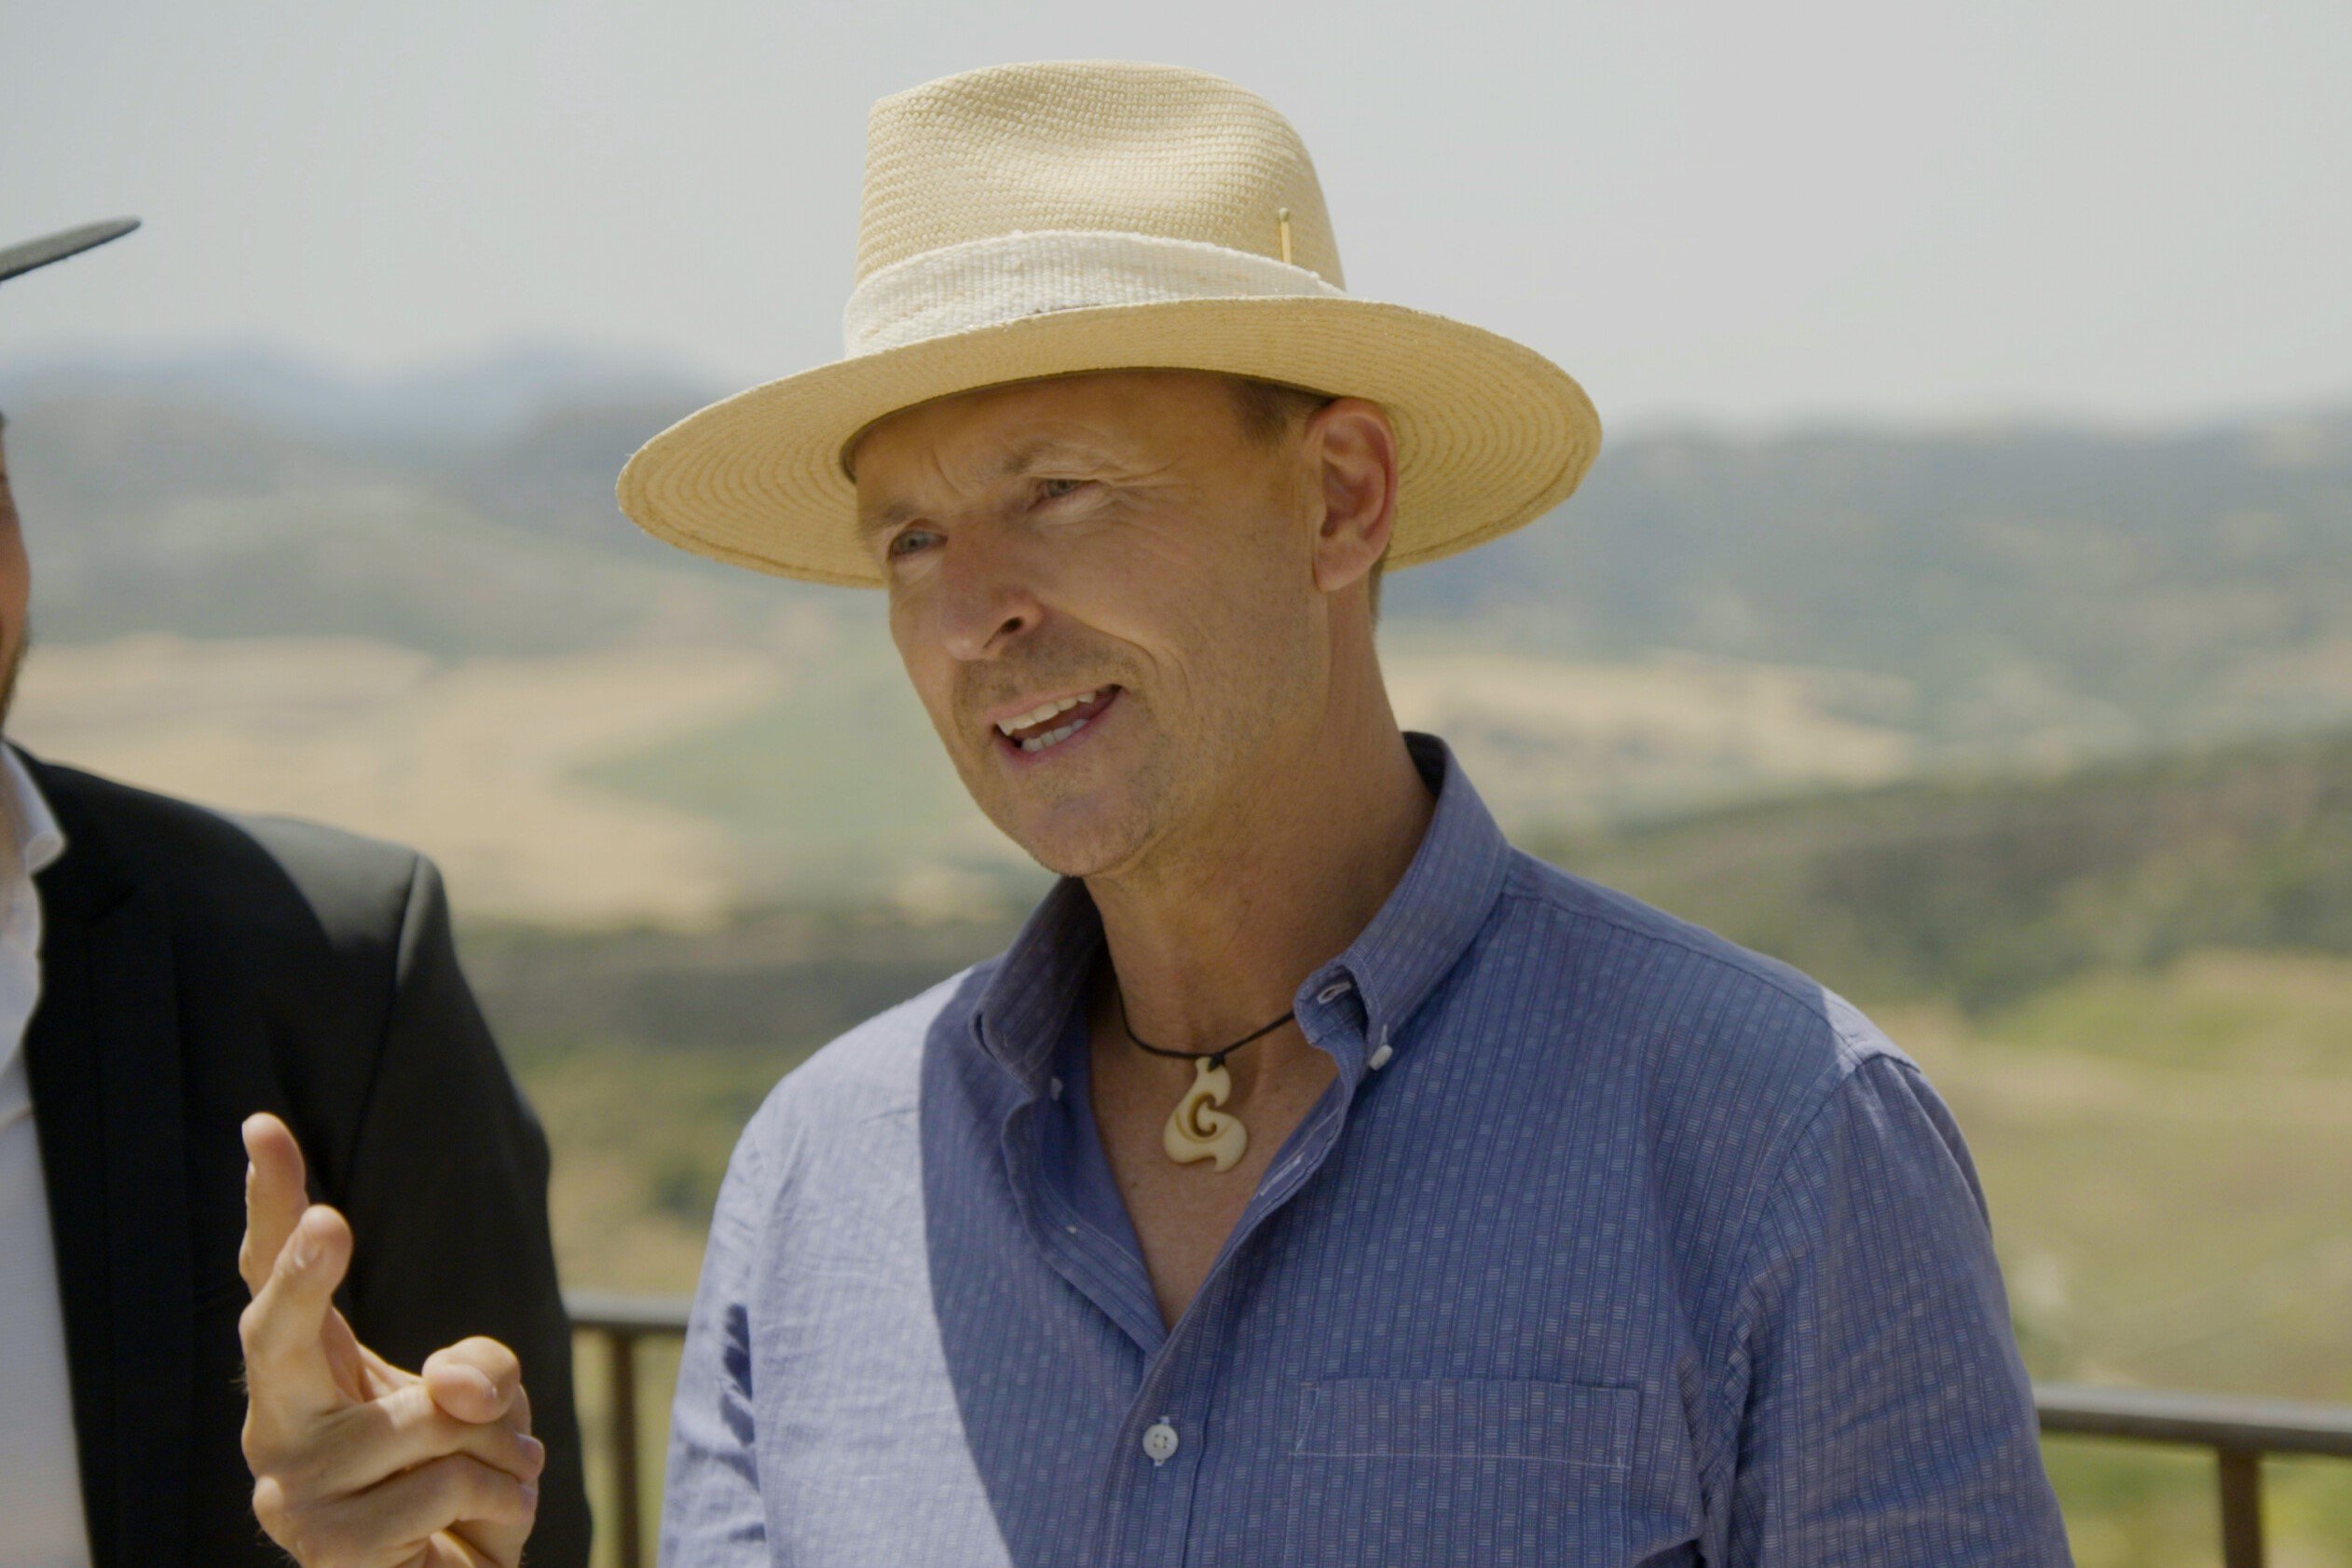 Phil Keoghan, who hosts a new episode of 'The Amazing Race 34' tonight, Nov. 23, on CBS, wears a blue button-down shirt and tan hat.